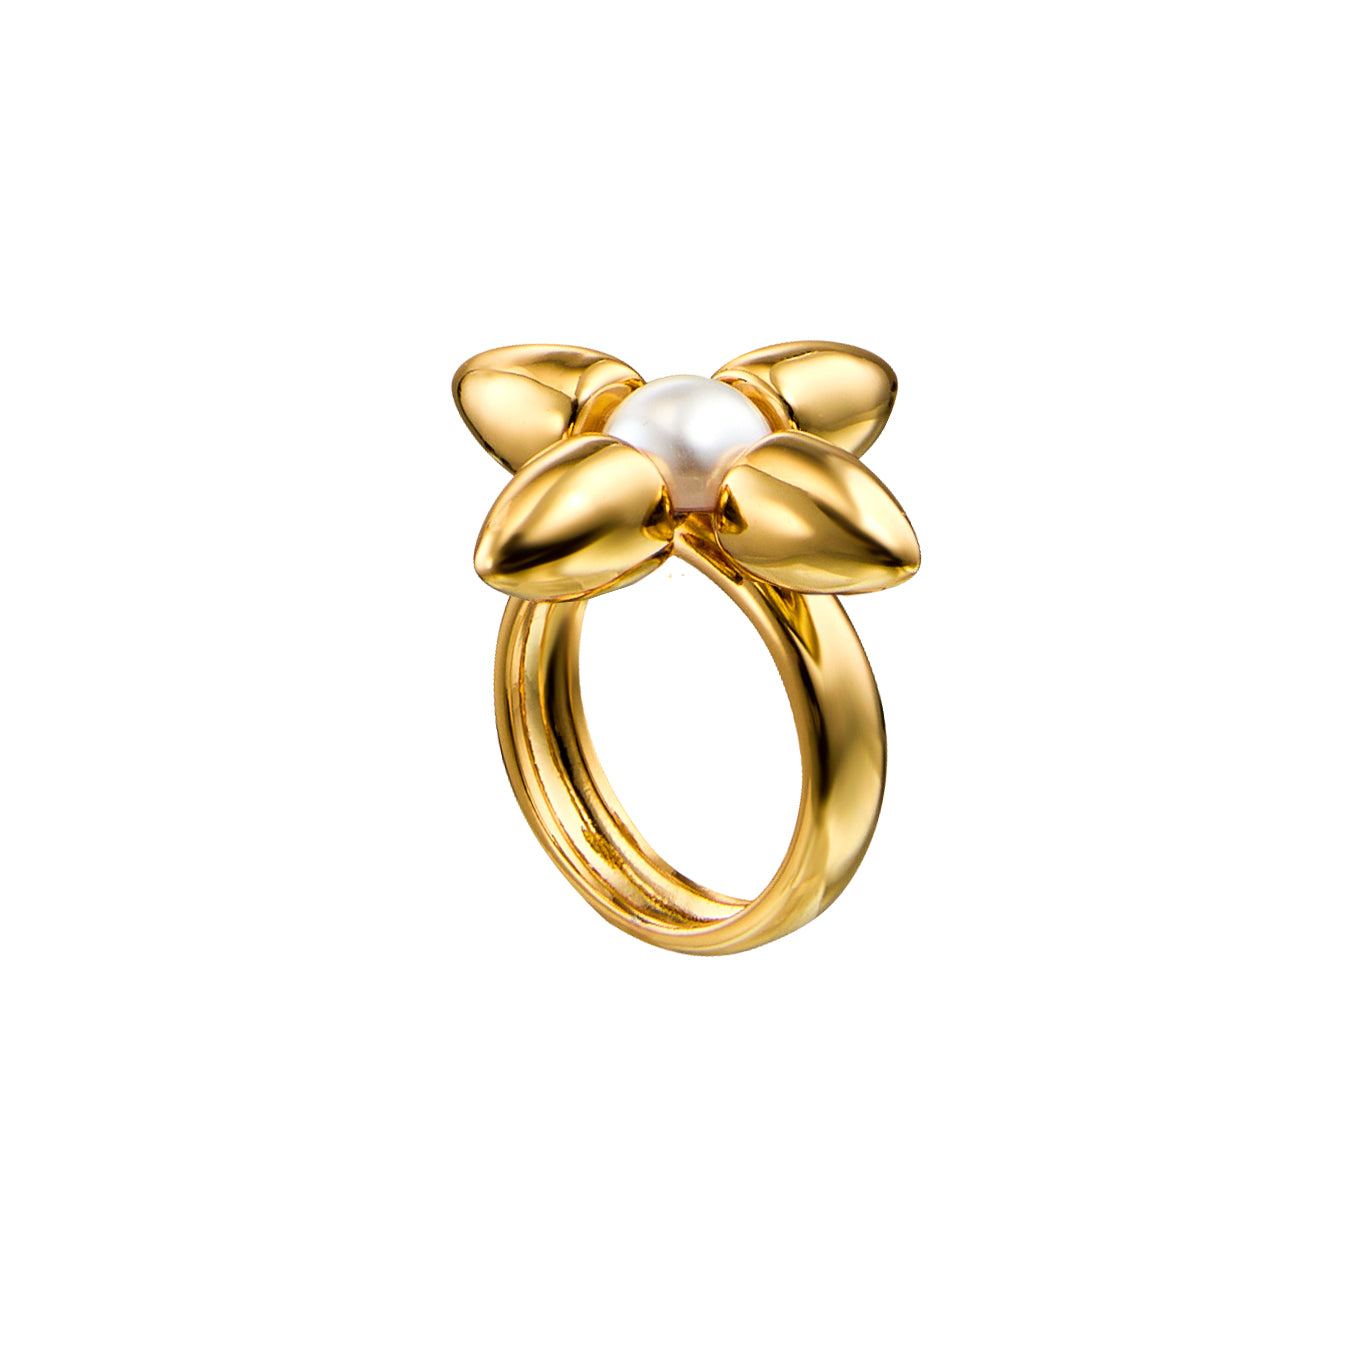 Marseille Ring, 18KT Gold Plated